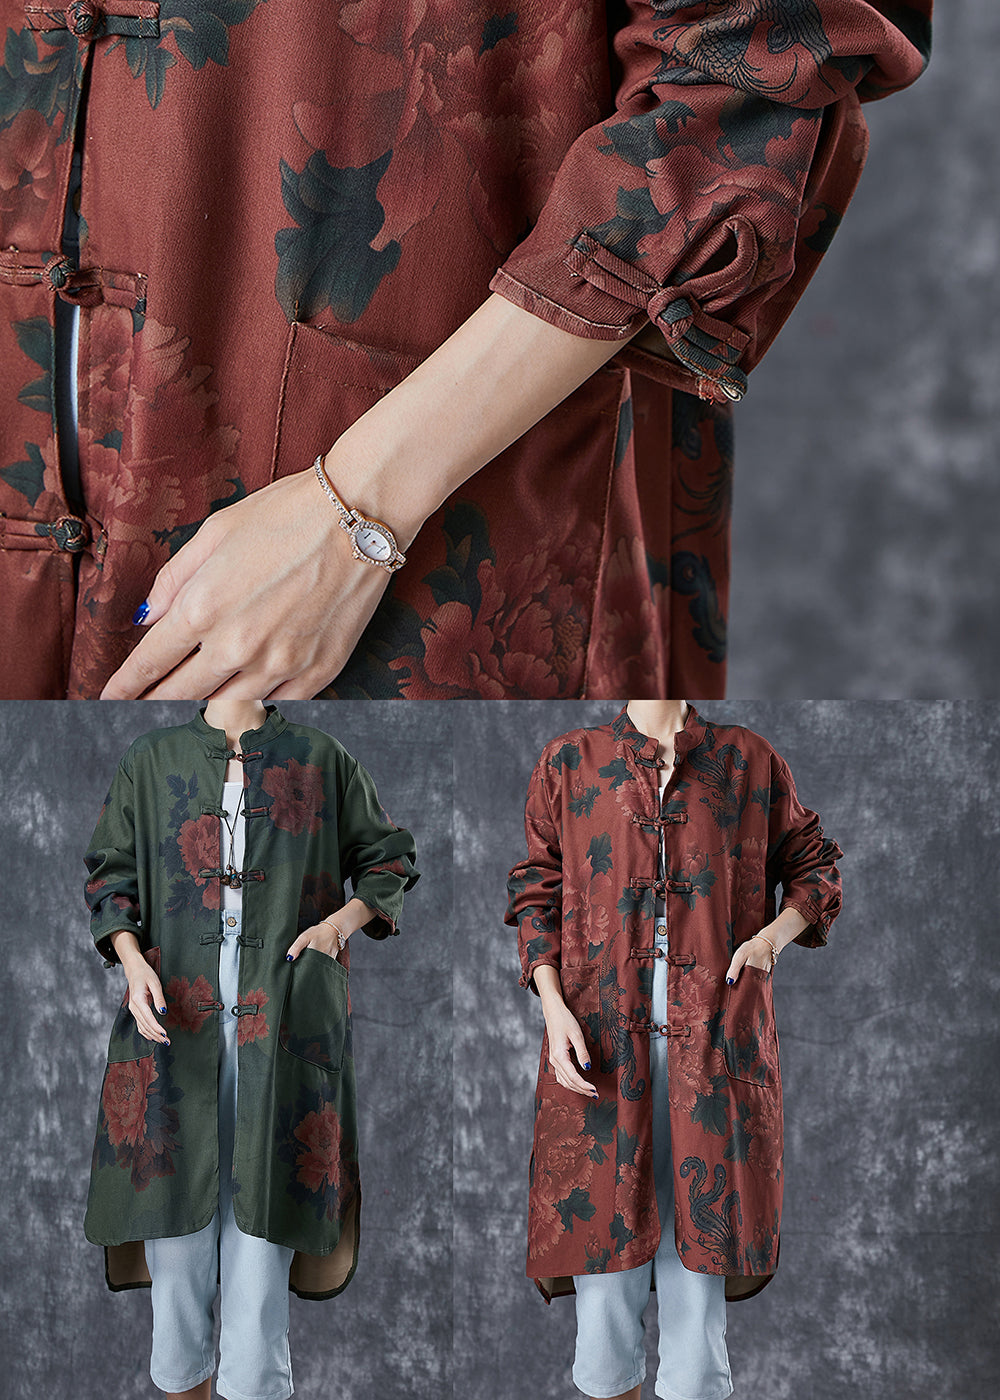 Dull Red Floral Print Linen Chinese Style Shirt Dress Fall Ada Fashion